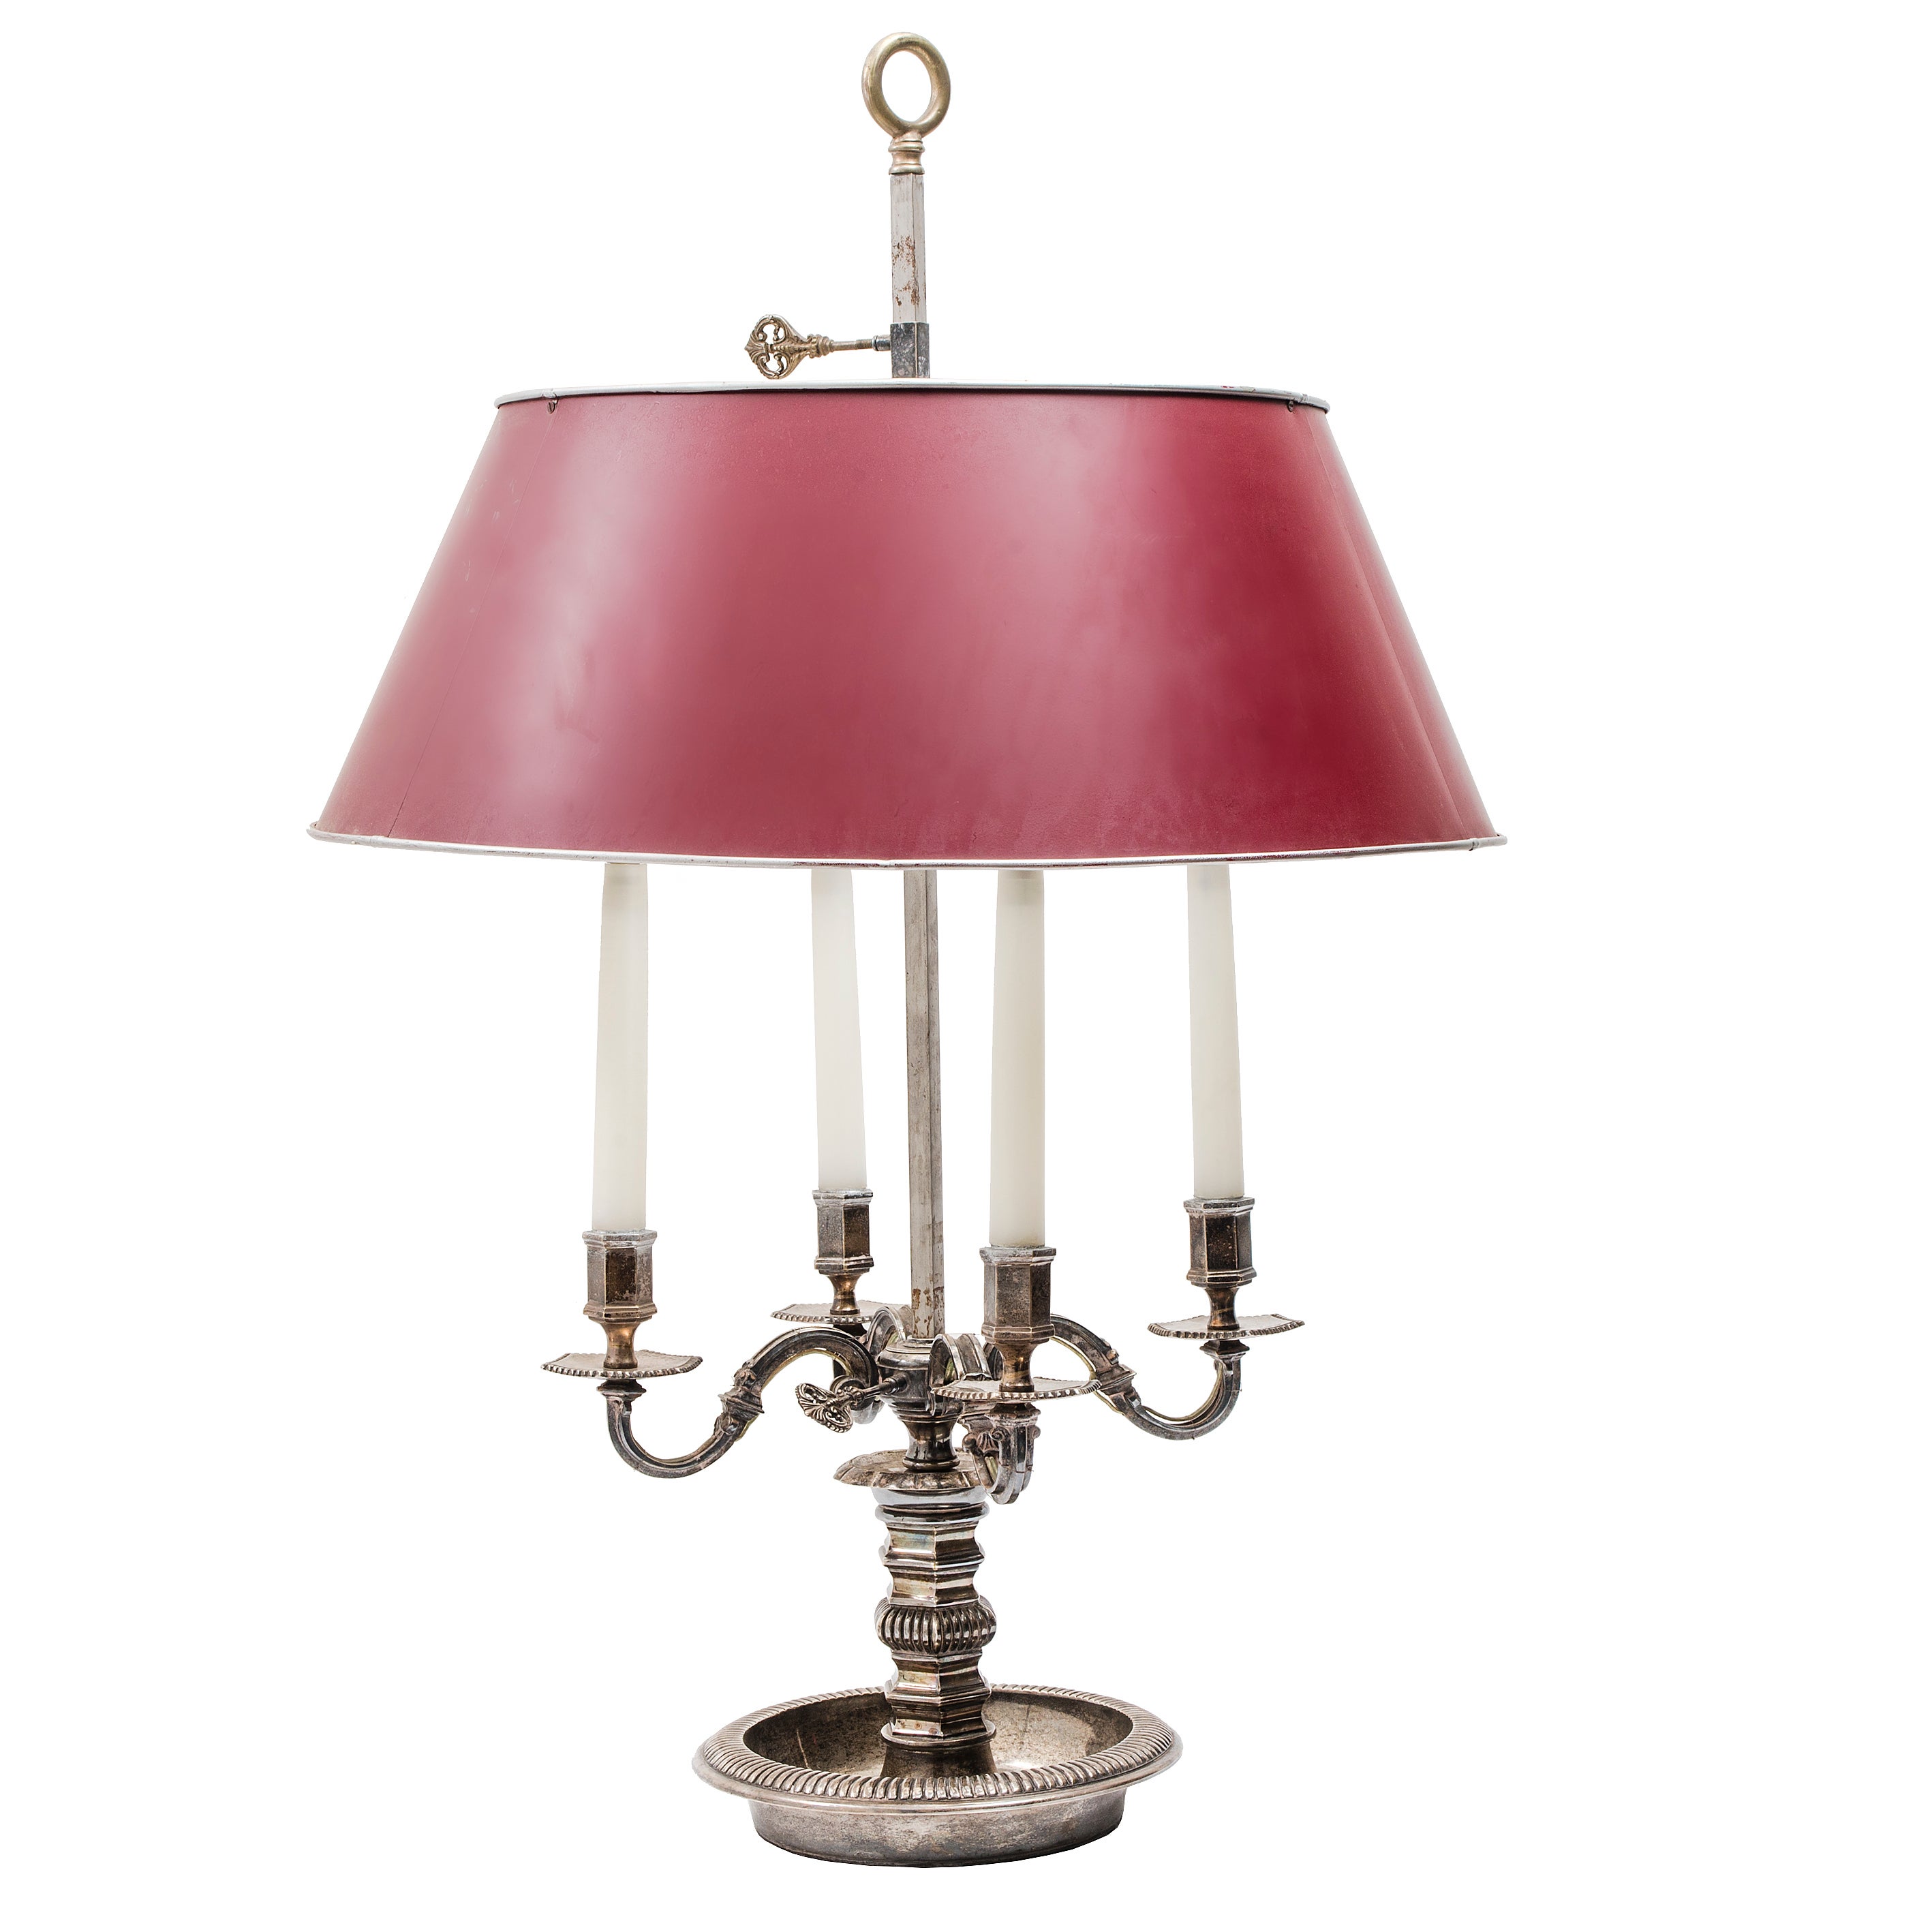 Large Napoleon III Silvered Bouillotte Lamp with Red Tole Shade c 1890.